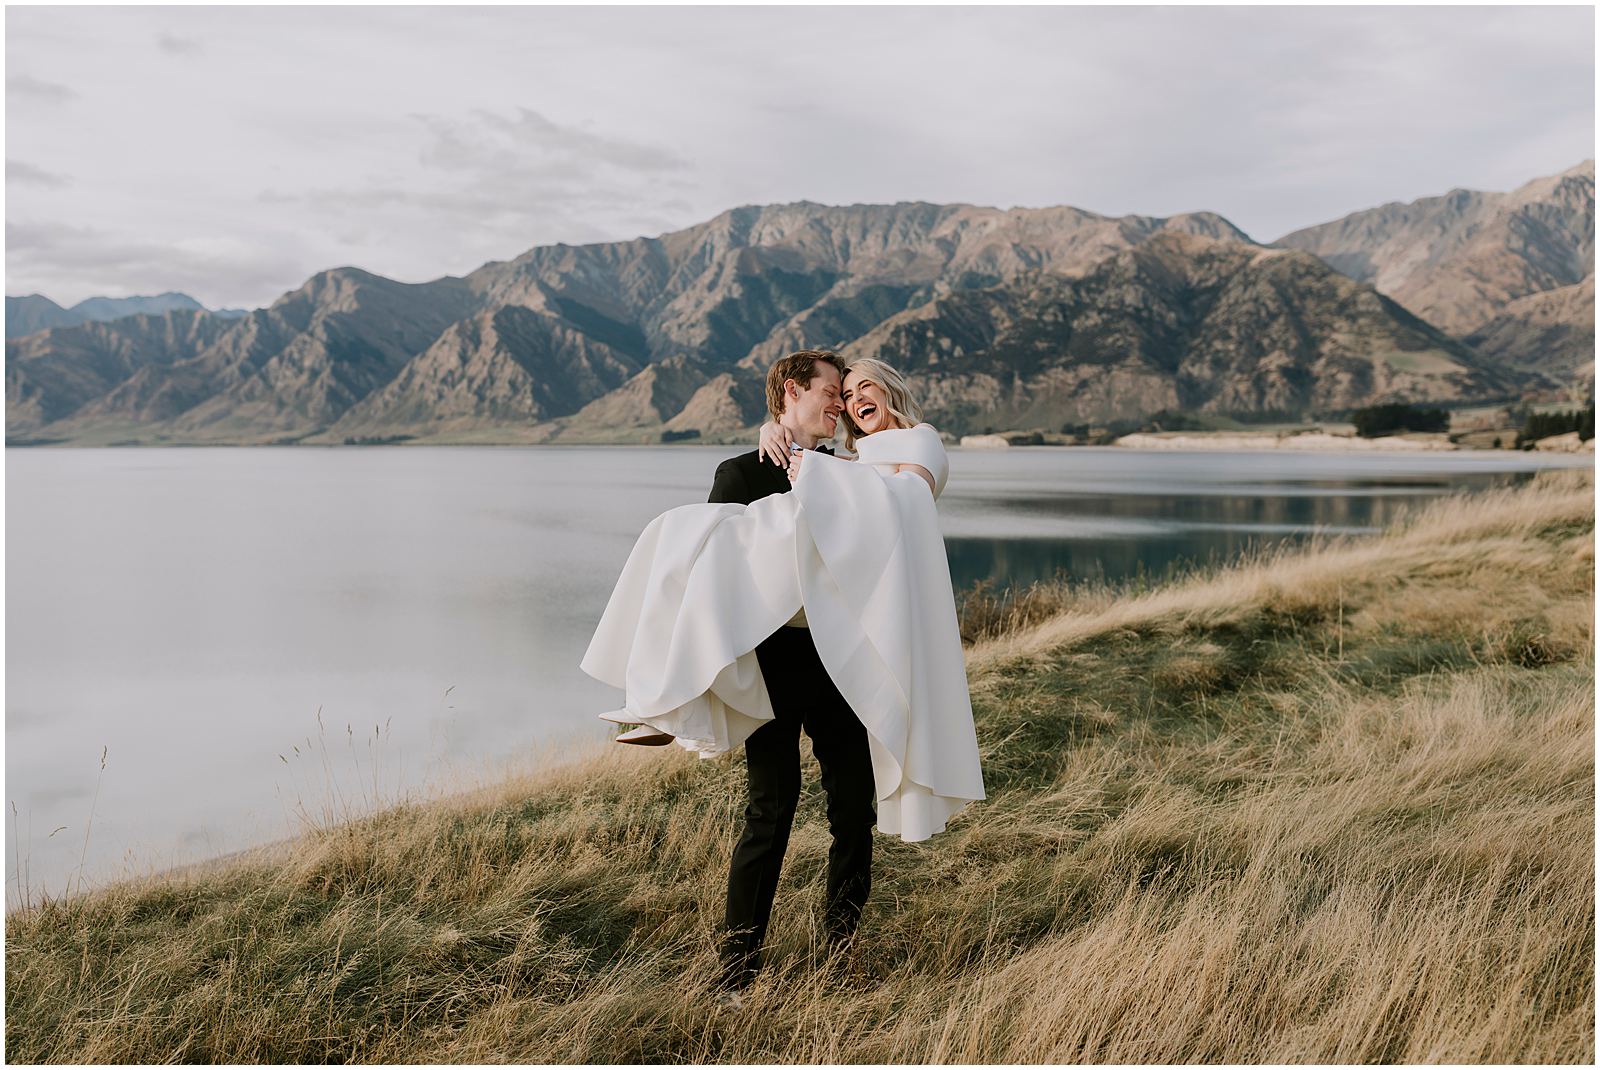 Charlotte Kiri Photography - Wedding Photography of a groom who wears a smart black suit, lifting his bride who wears a stunning white off-shoulder dress, as they stand on the edge of a picturesque glacial Lake with a backdrop of mountains in Wanaka, New Zealand.